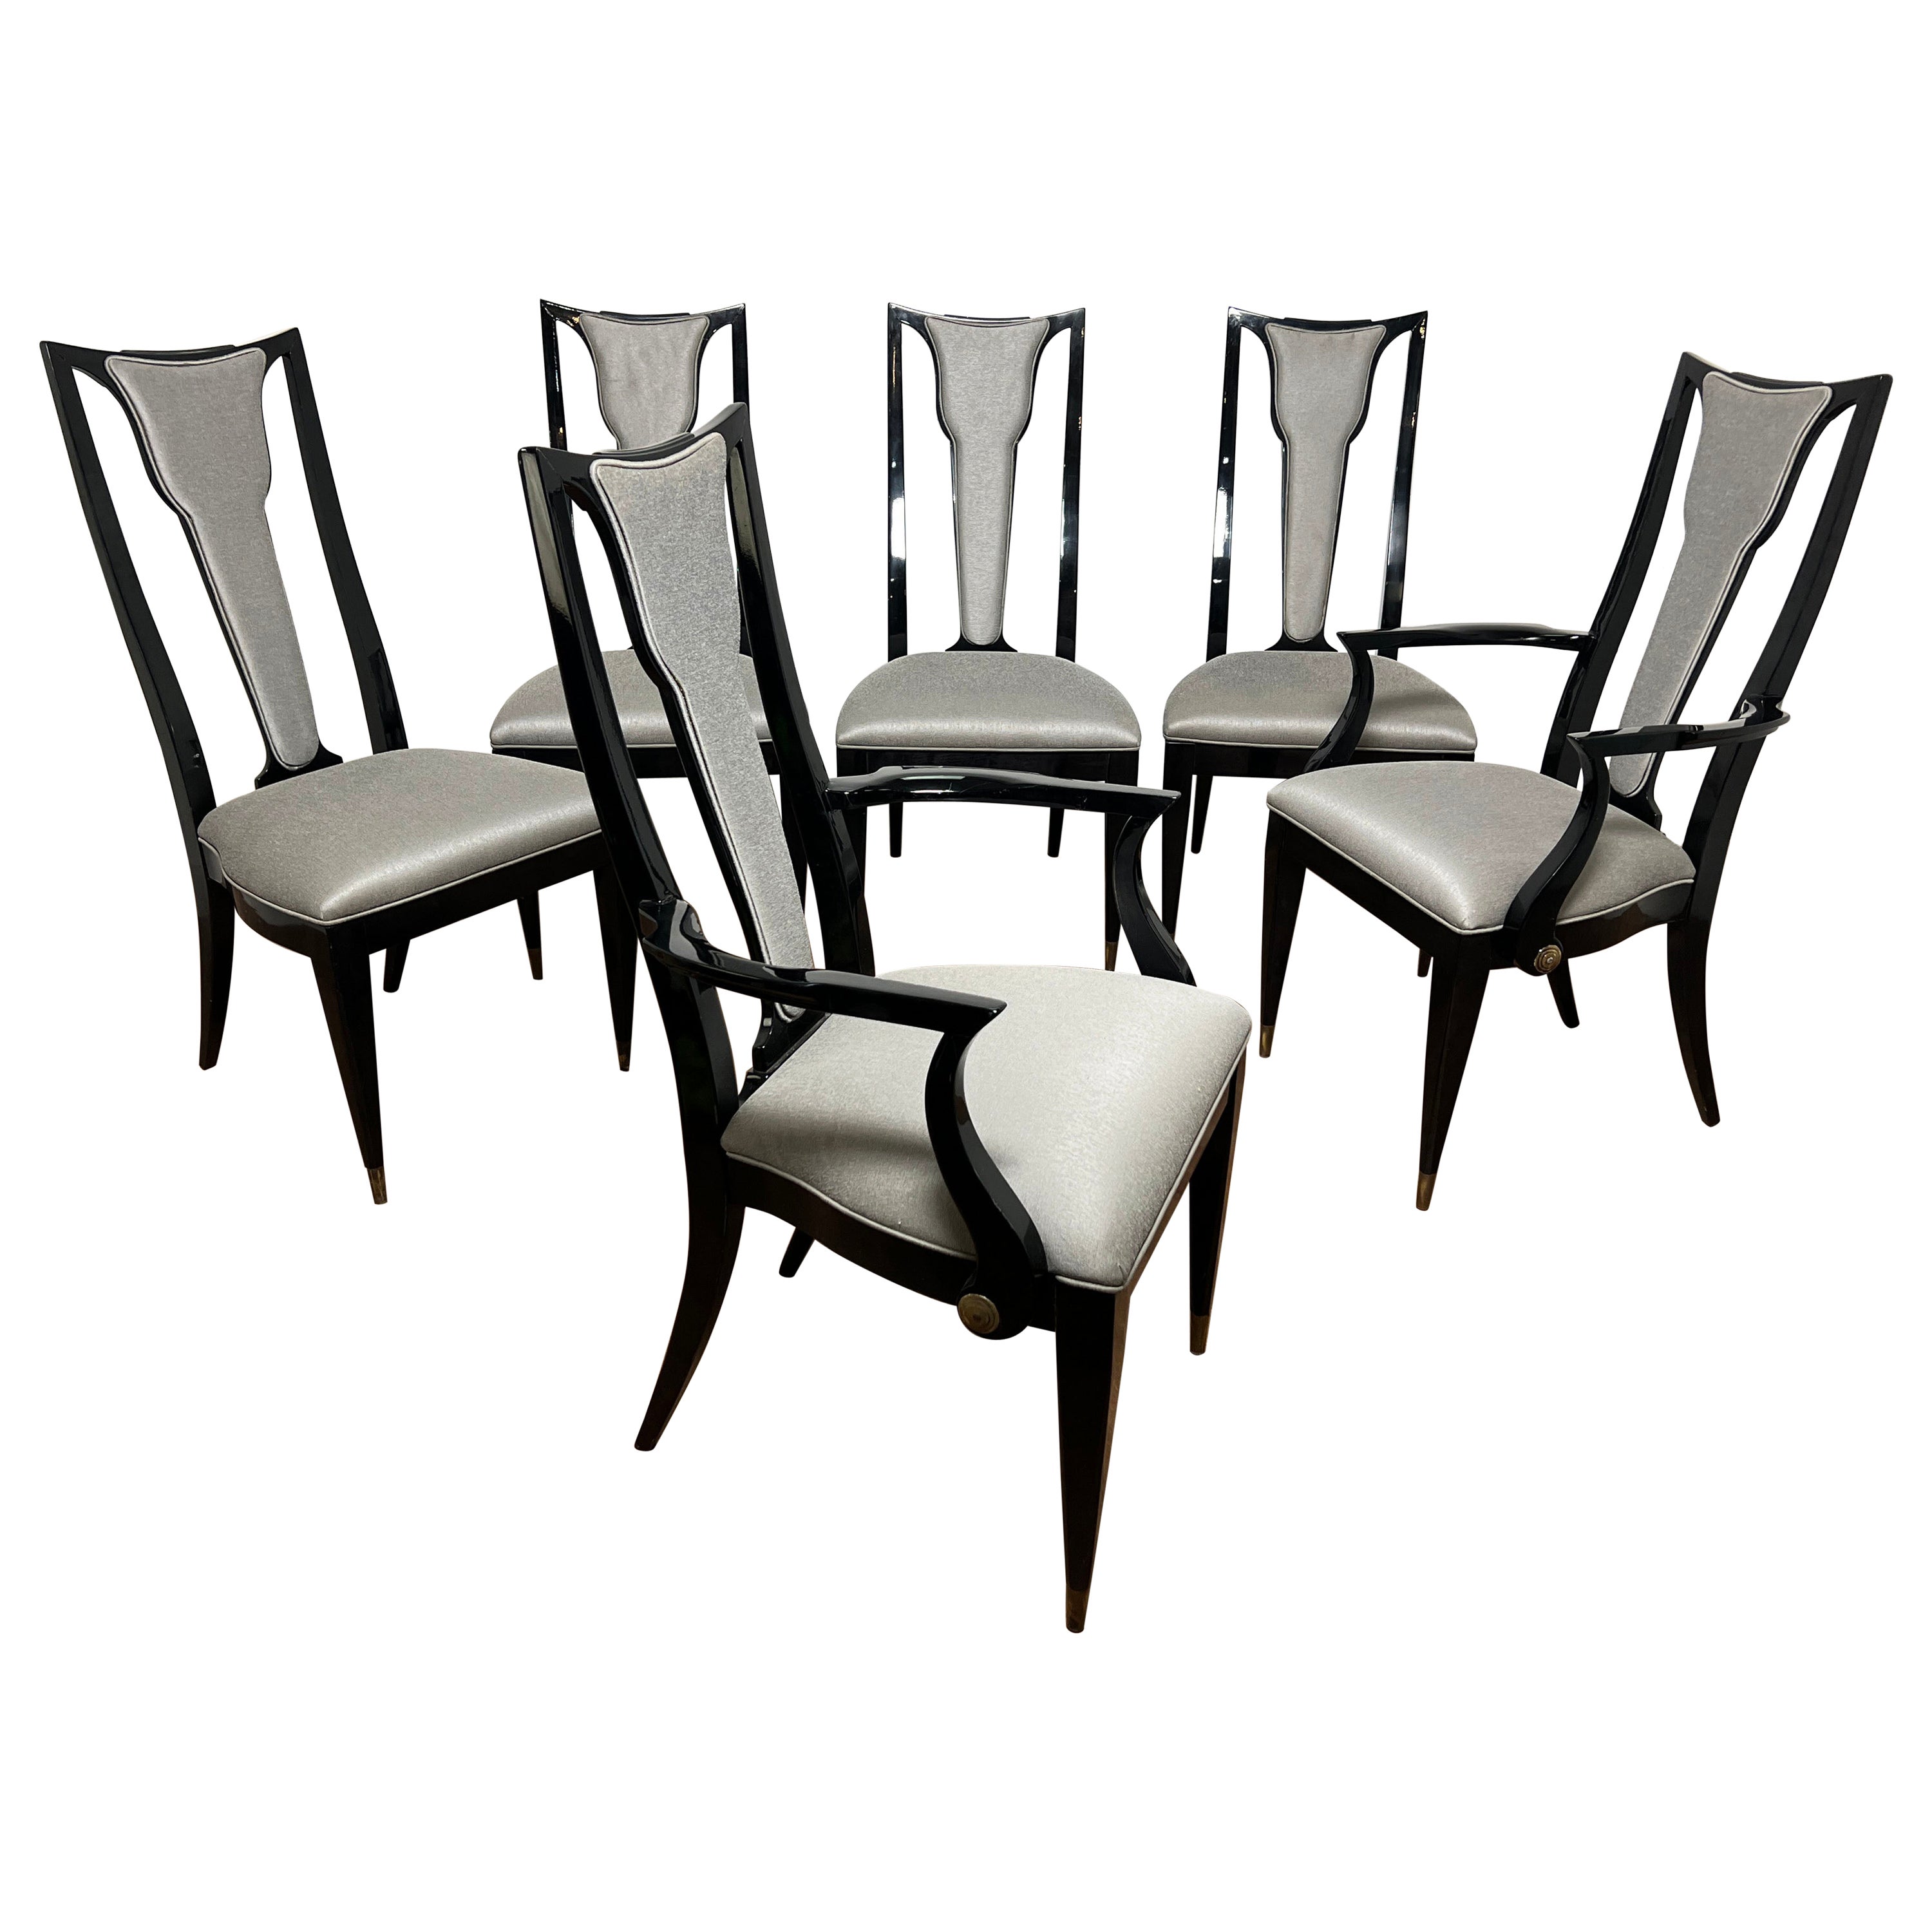 Set of Six Italian Modern Style Dining Chairs from Ryan Korban Interior For Sale